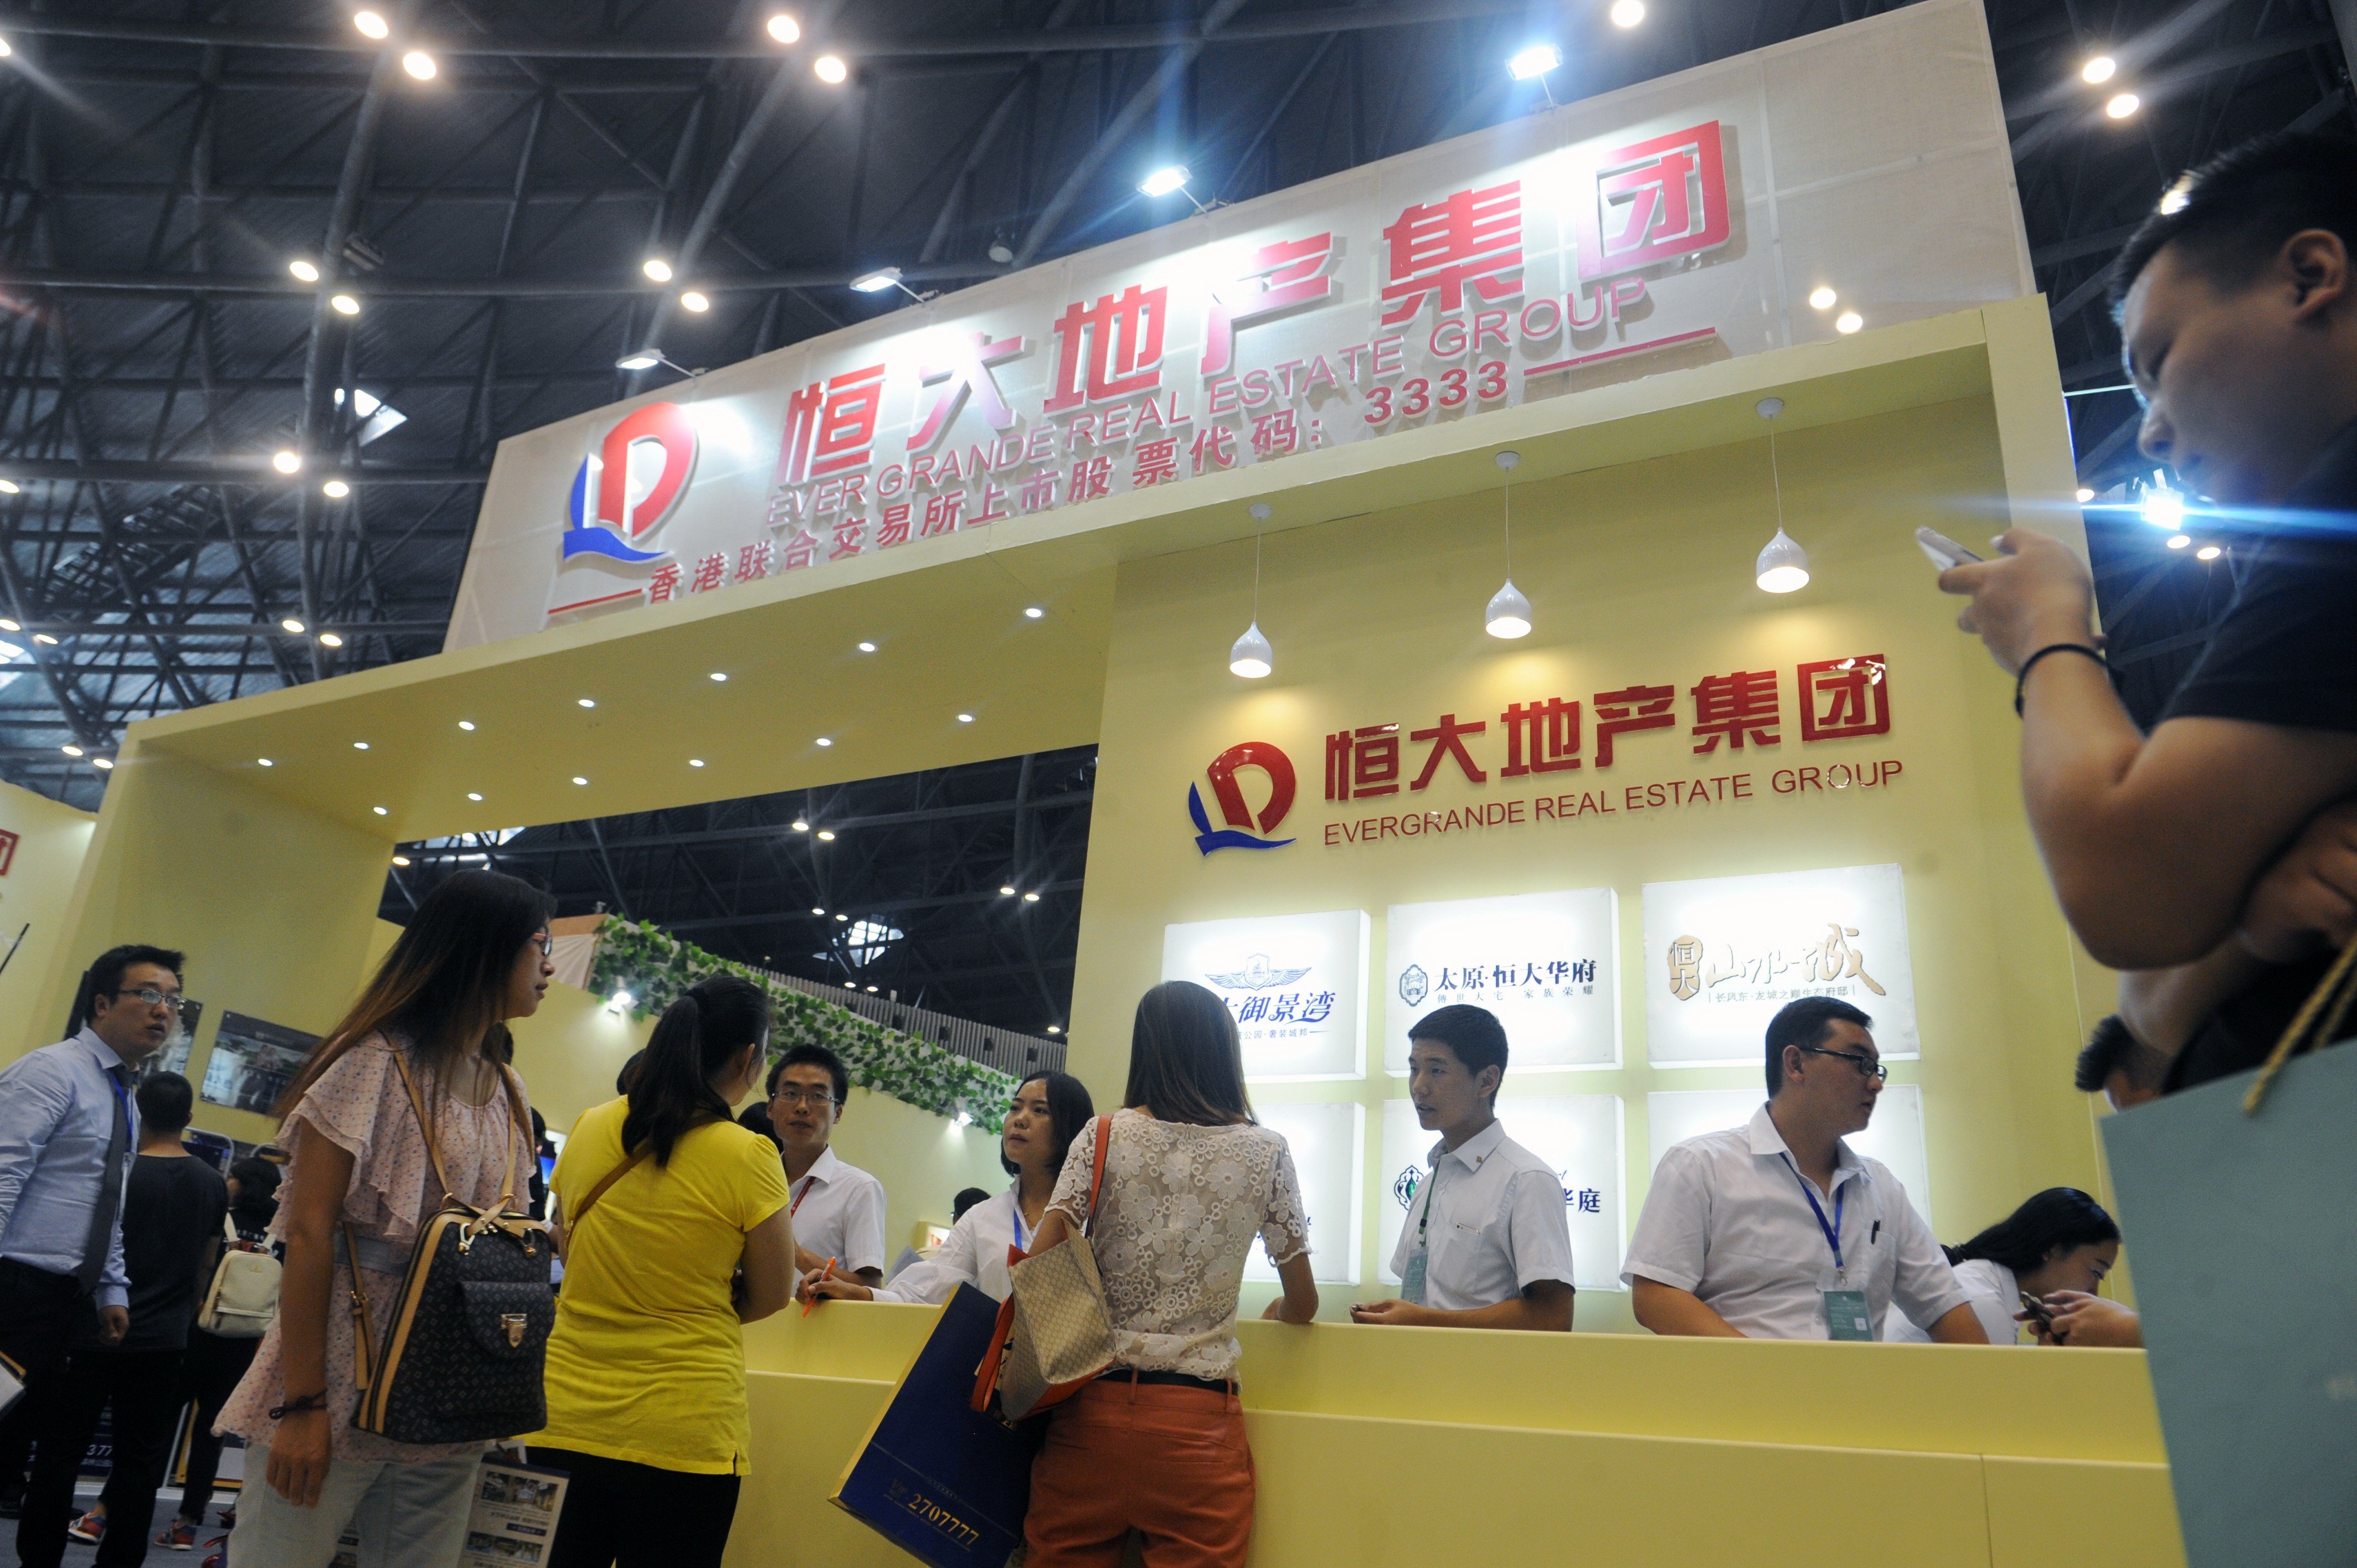 Mainland property stocks, including China Evergrande Group, got a further boost last week when two state-owned banks in Shanghai lowered their first-home mortgage rates to help prop up the property market. Photo: Imaginechina